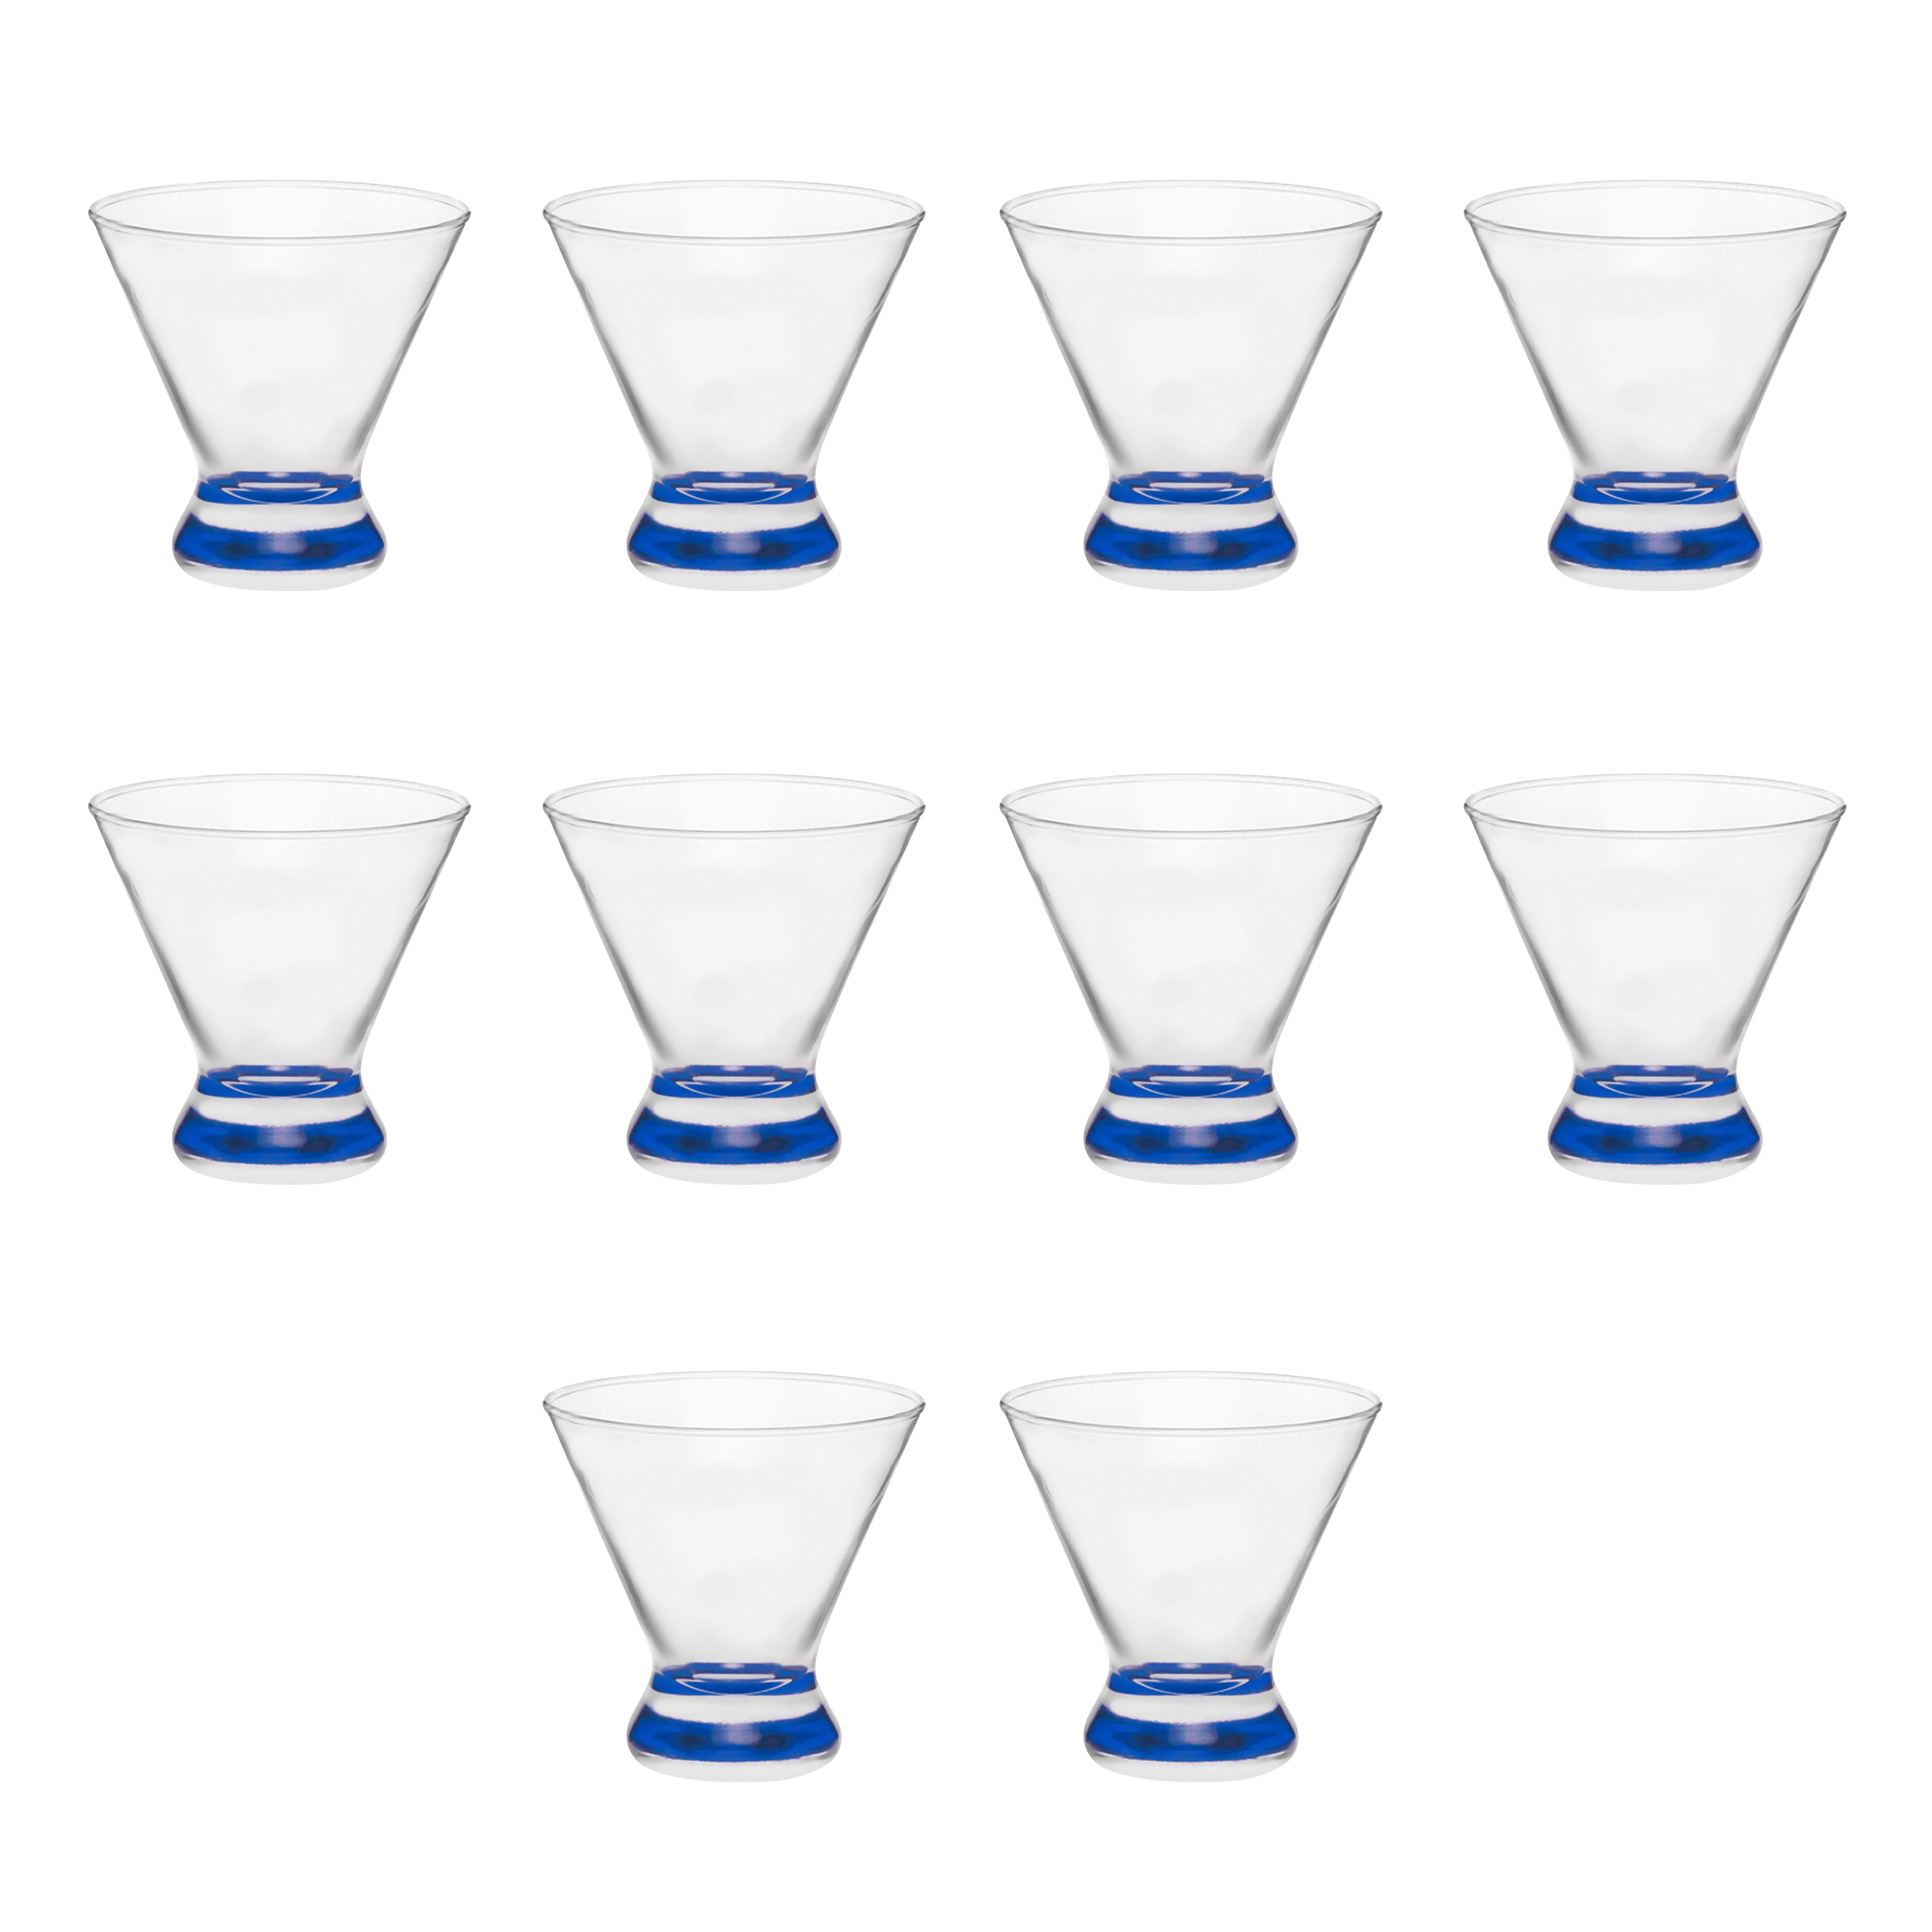 Custom Classic Martini Glasses 9.25 oz. Set of 10, Personalized Bulk Pack -  Great for Cocktails, Wed…See more Custom Classic Martini Glasses 9.25 oz.